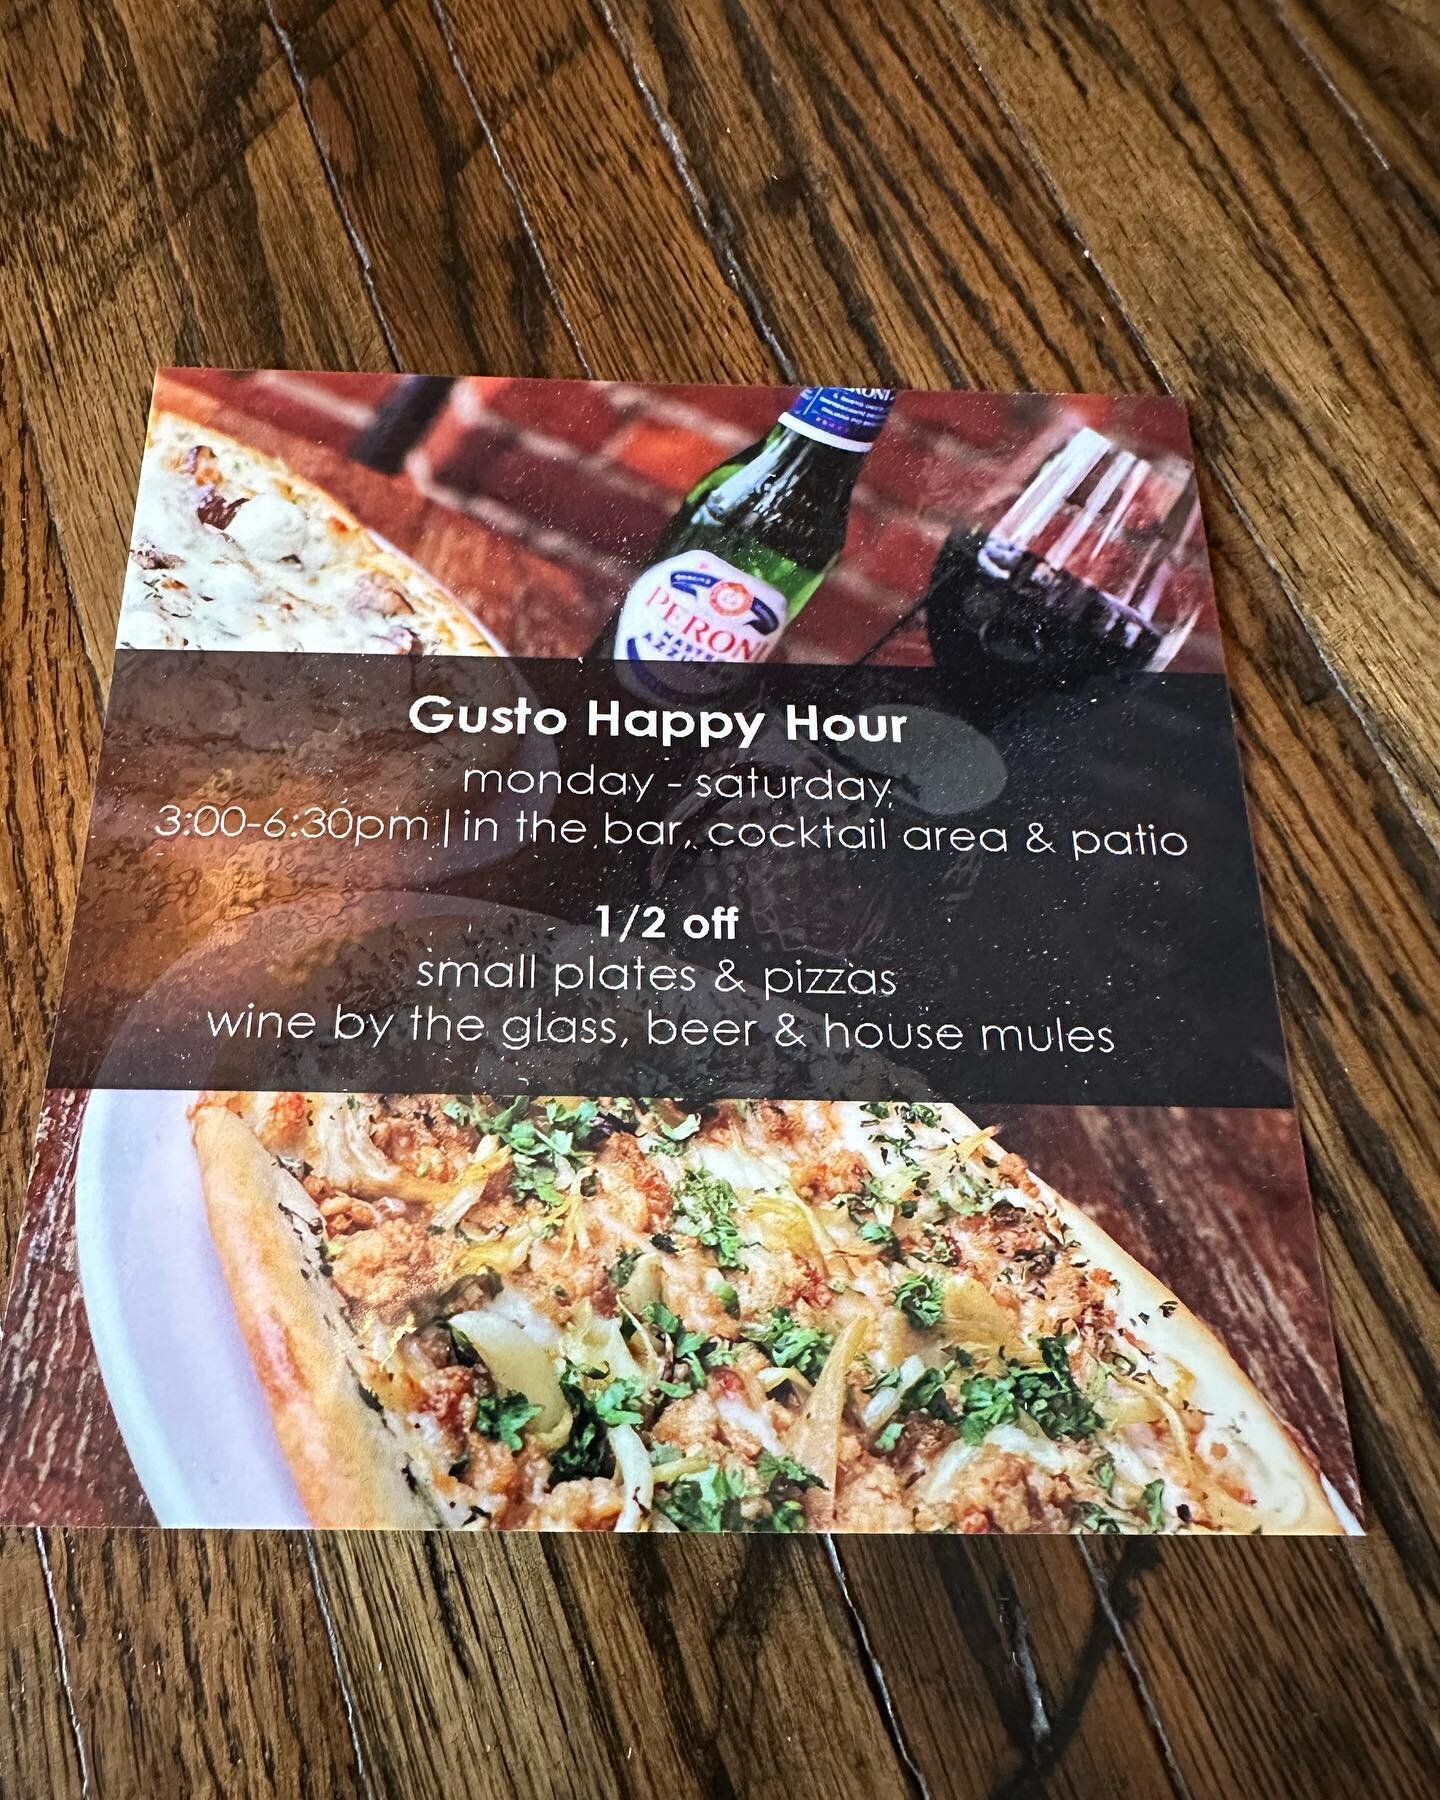 Join us for Gusto Happy Hour from 3-6:30pm for half off appetizers, pizzas, beers, glasses of wine, and house mules! 

&bull;
&bull;
&bull;
&bull;
&bull;
&bull;
#dueamici #downtowncolumbus #happyhour #pizzas #appetizers #wine #beer #italian #cbushapp